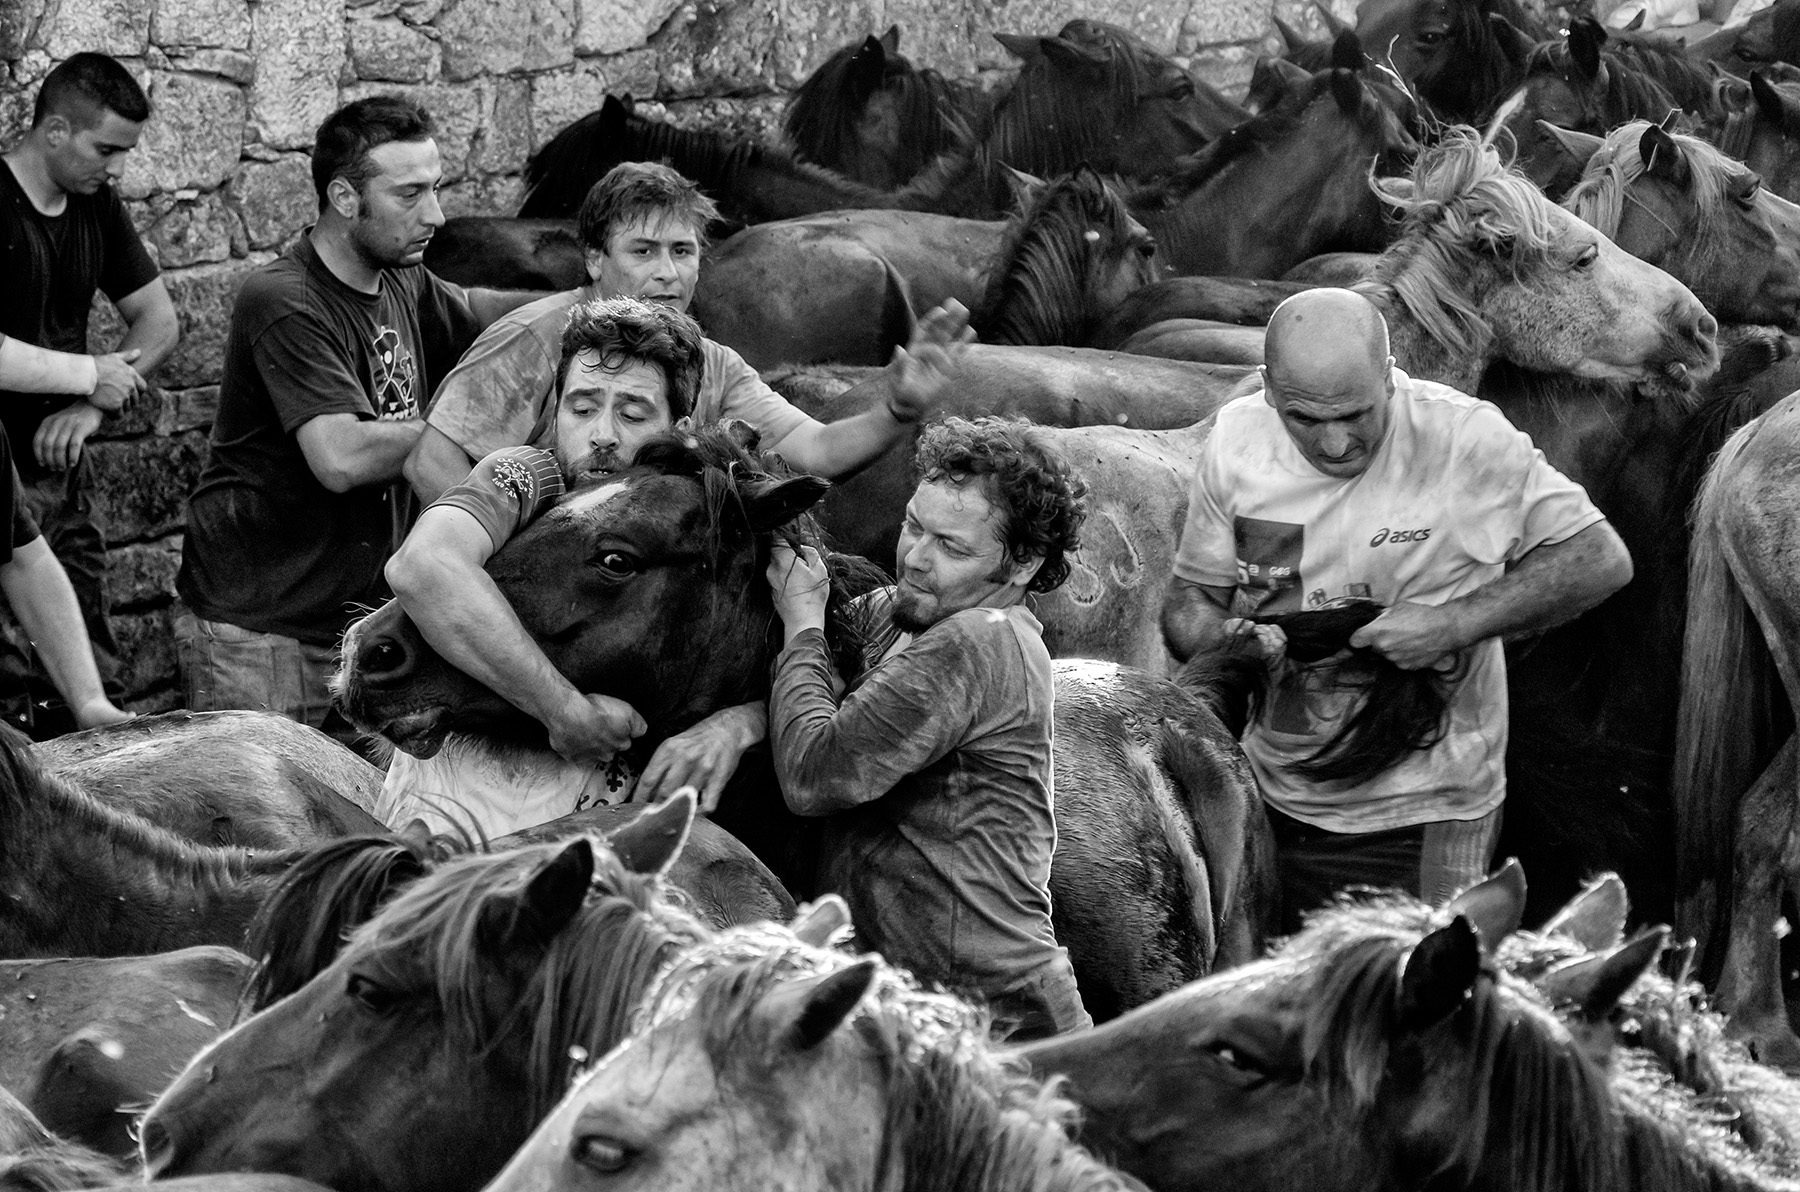 In groups of three, the "Aloitadores" grab the head and the tail of the horse, and take it down